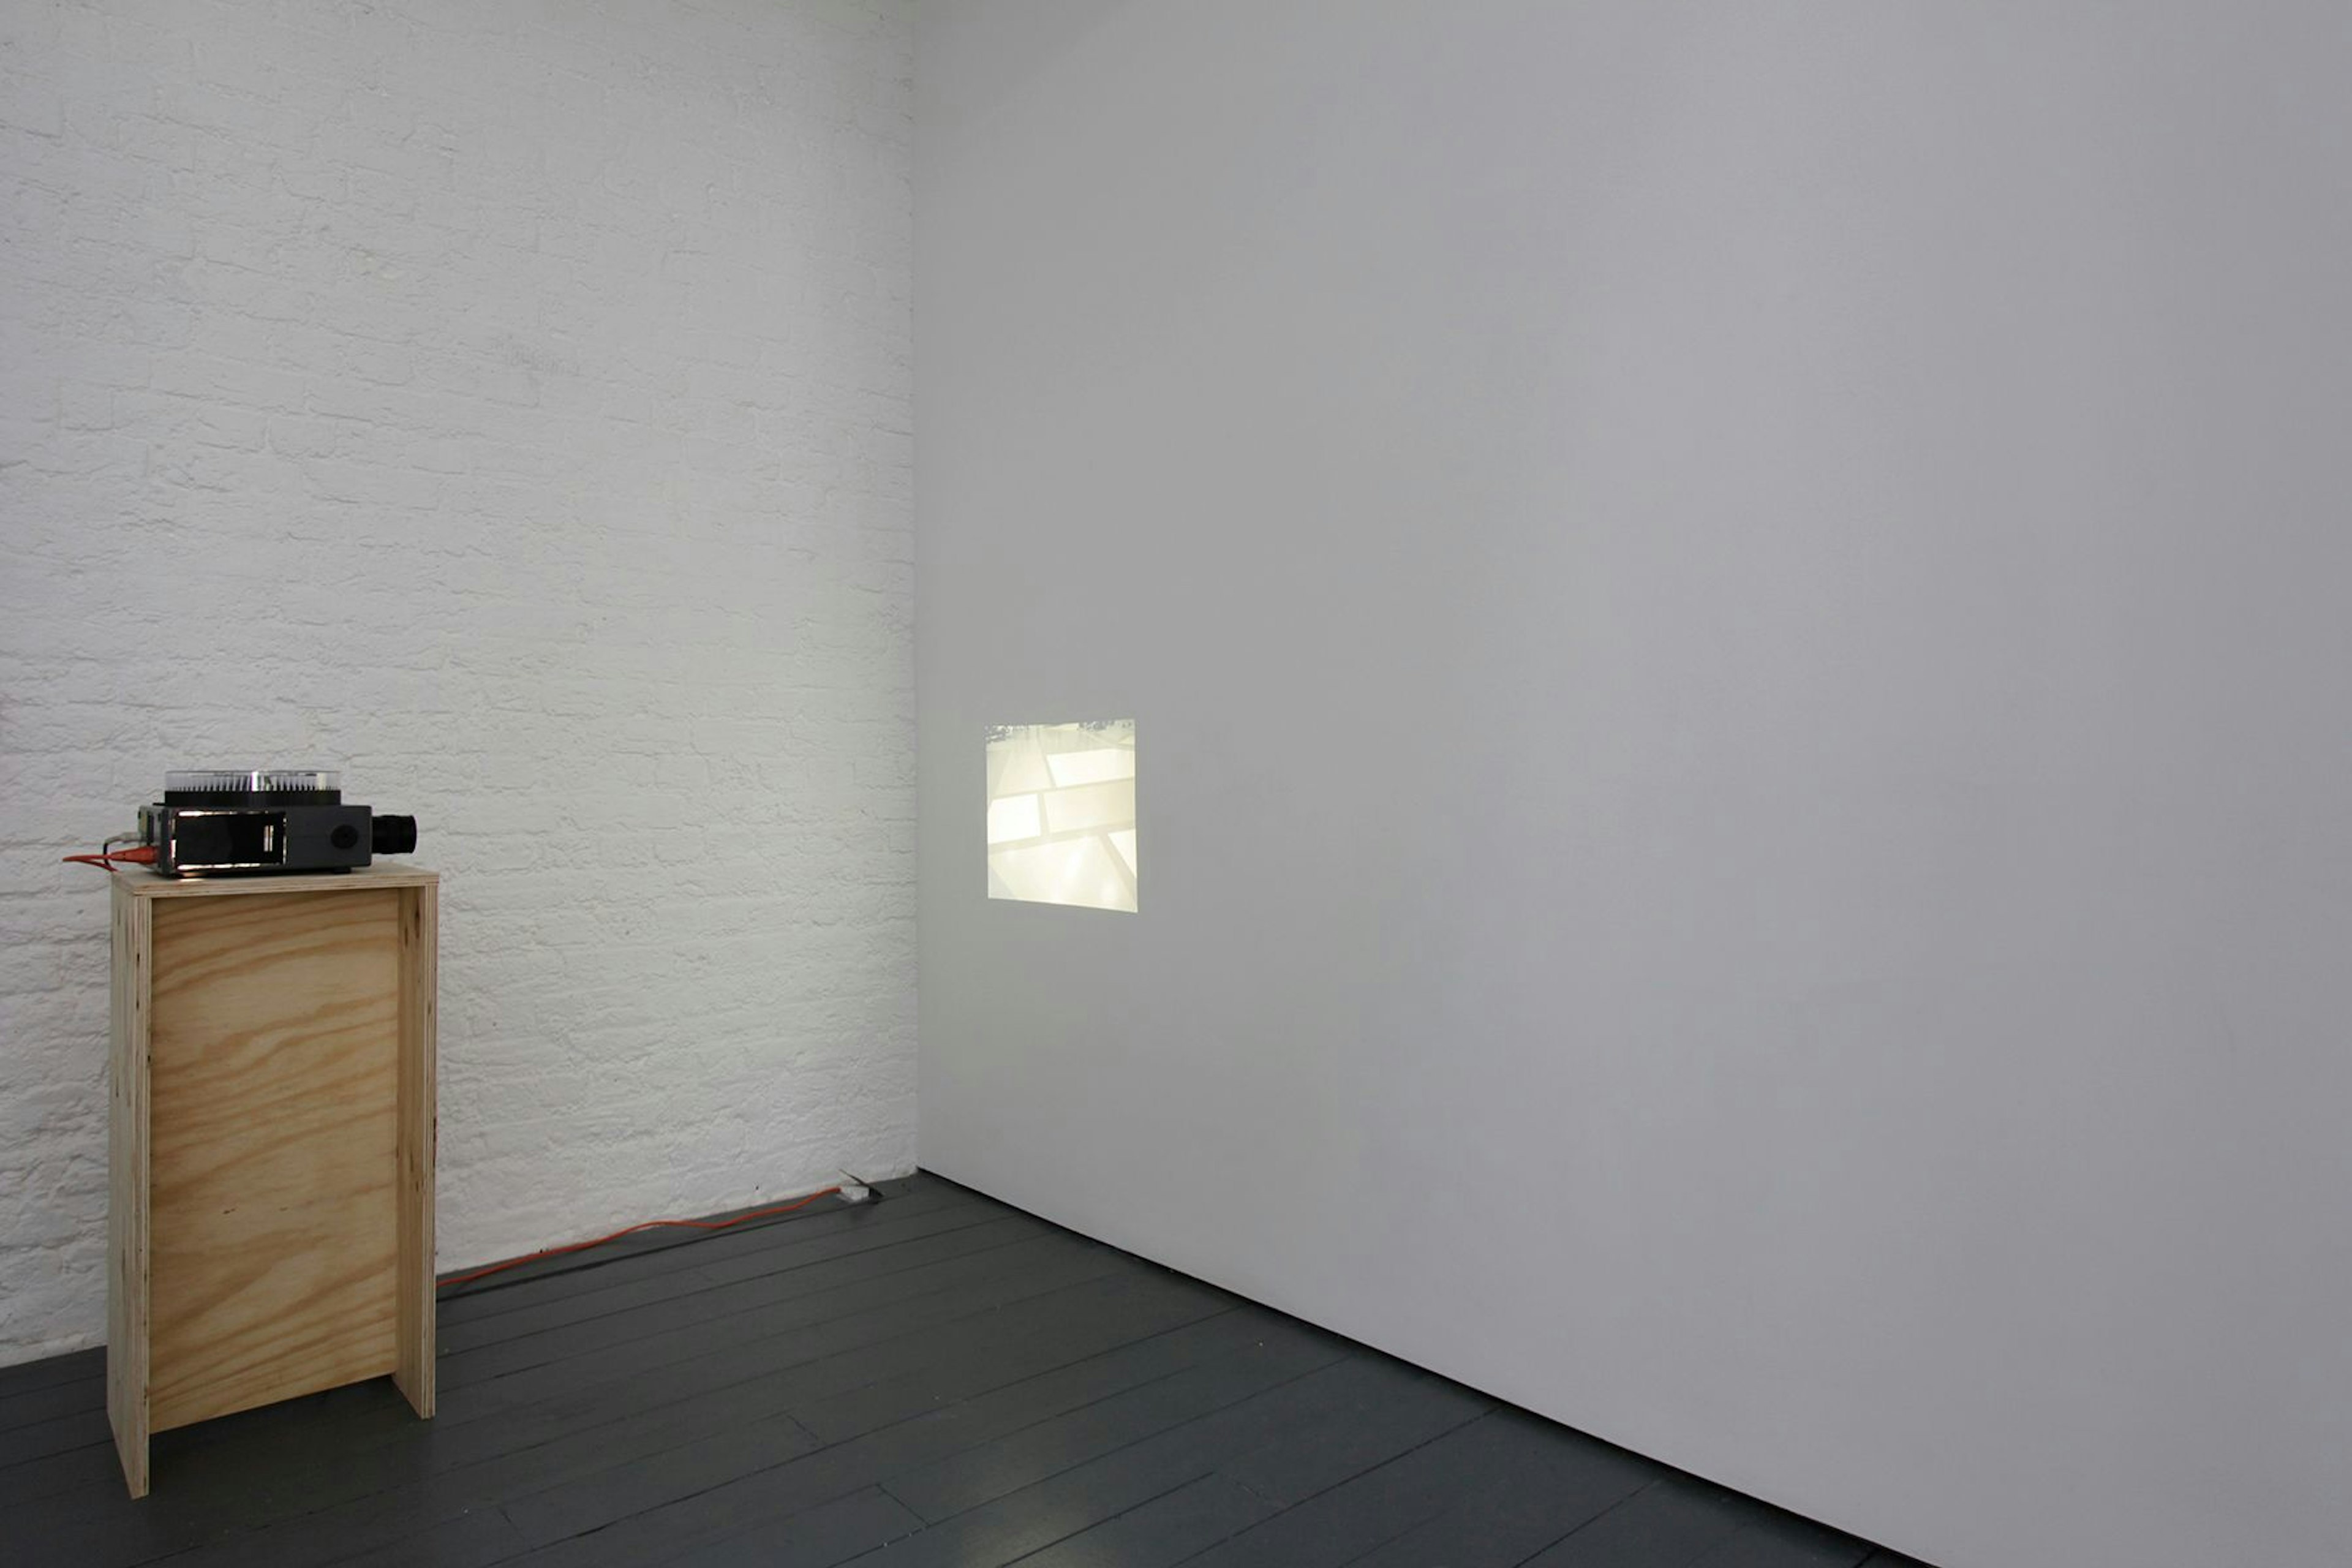 Grounds, 2003-2013 installation view